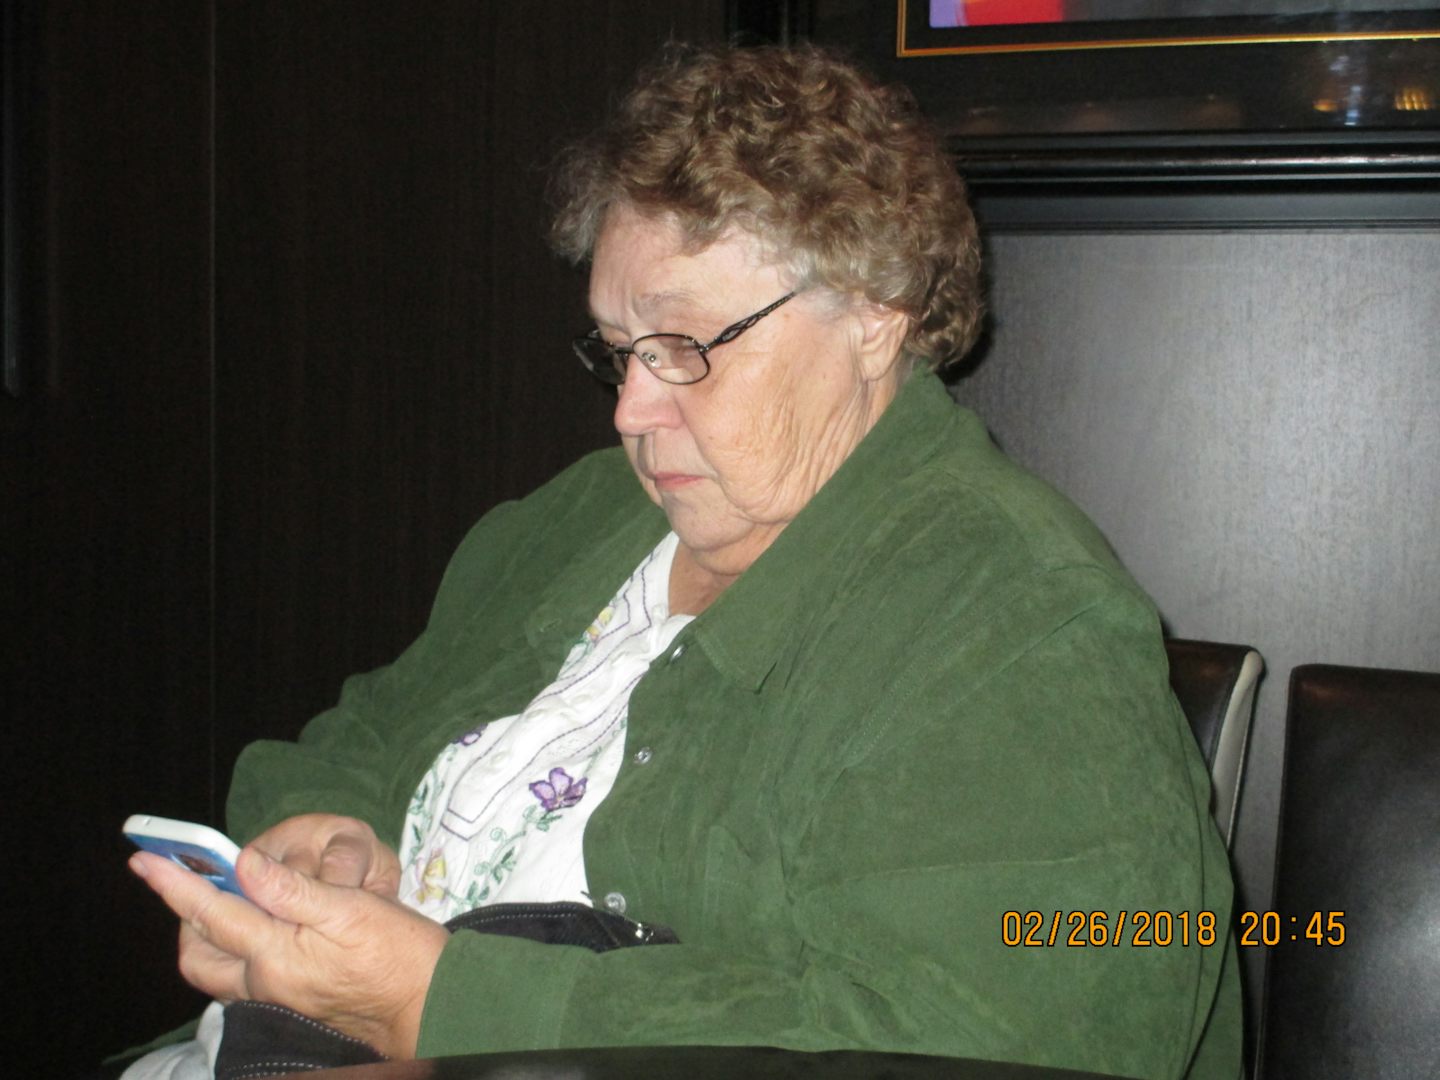 My friend Sharon using her cell phone to keep track of her memories.